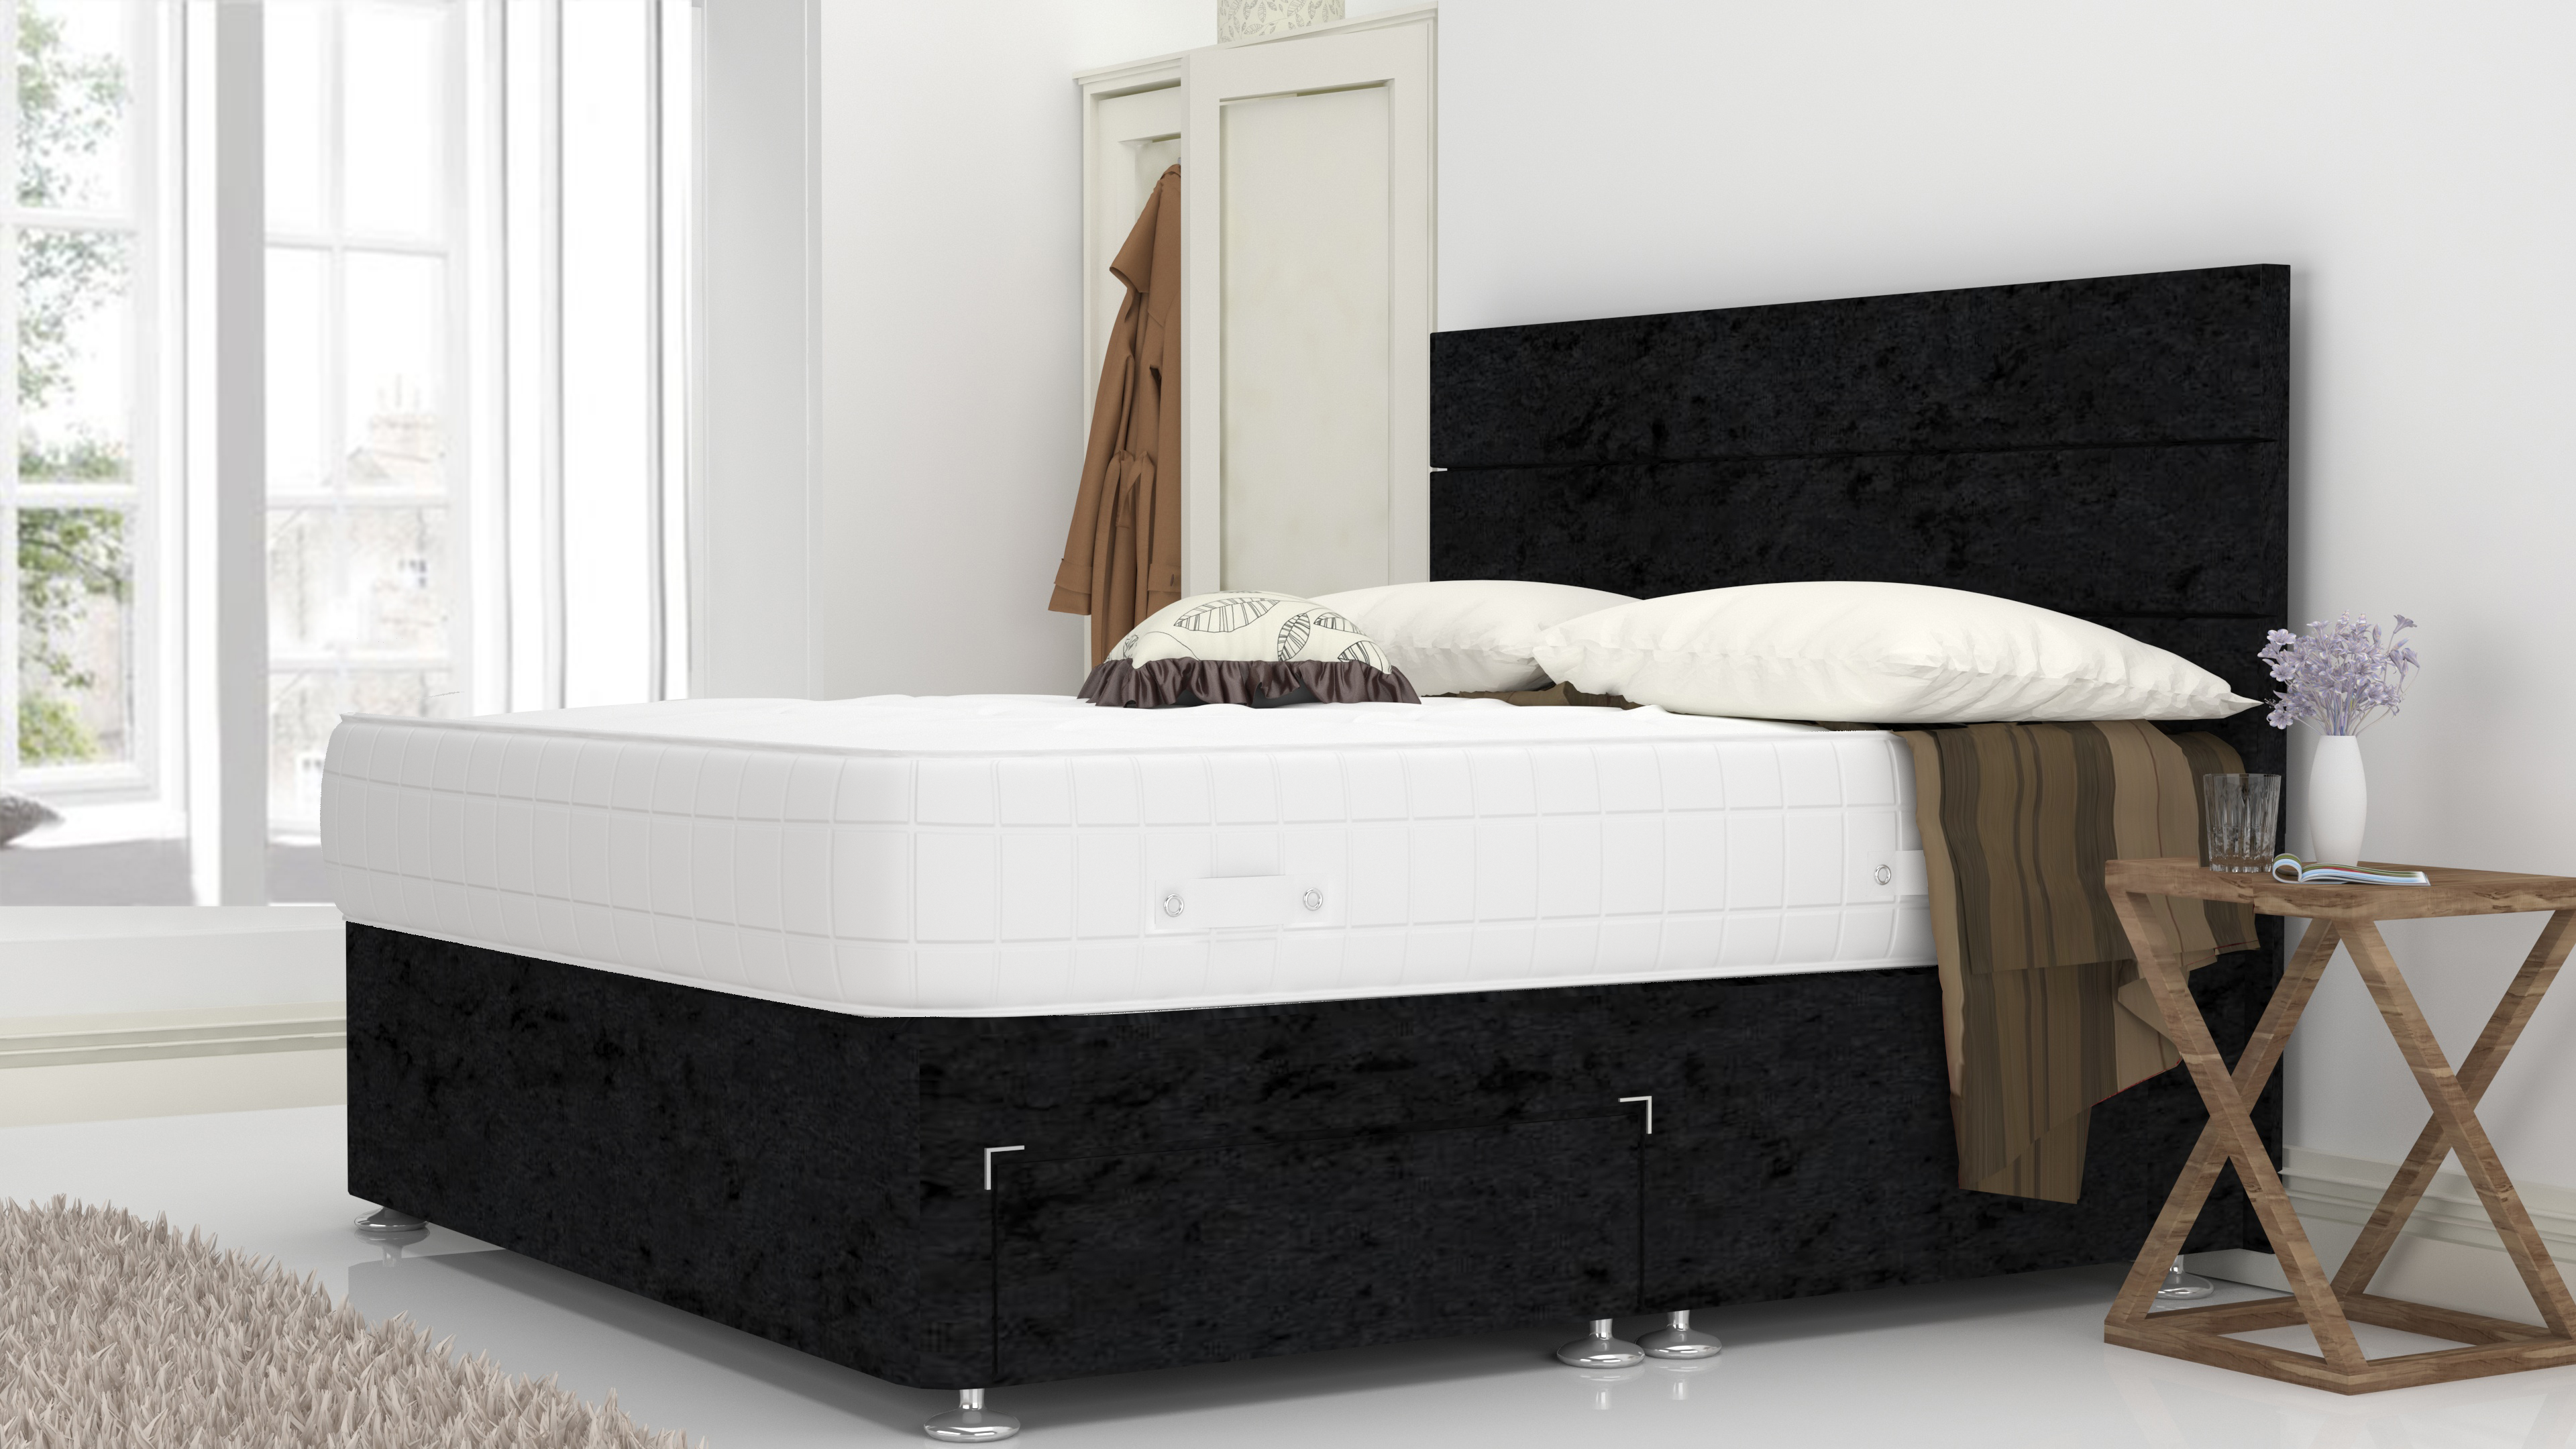 Black Crushed 4 Feet Divan Bed Set With 3 Panel Headboard (Included Feet) And Free Pillow Top Mattress